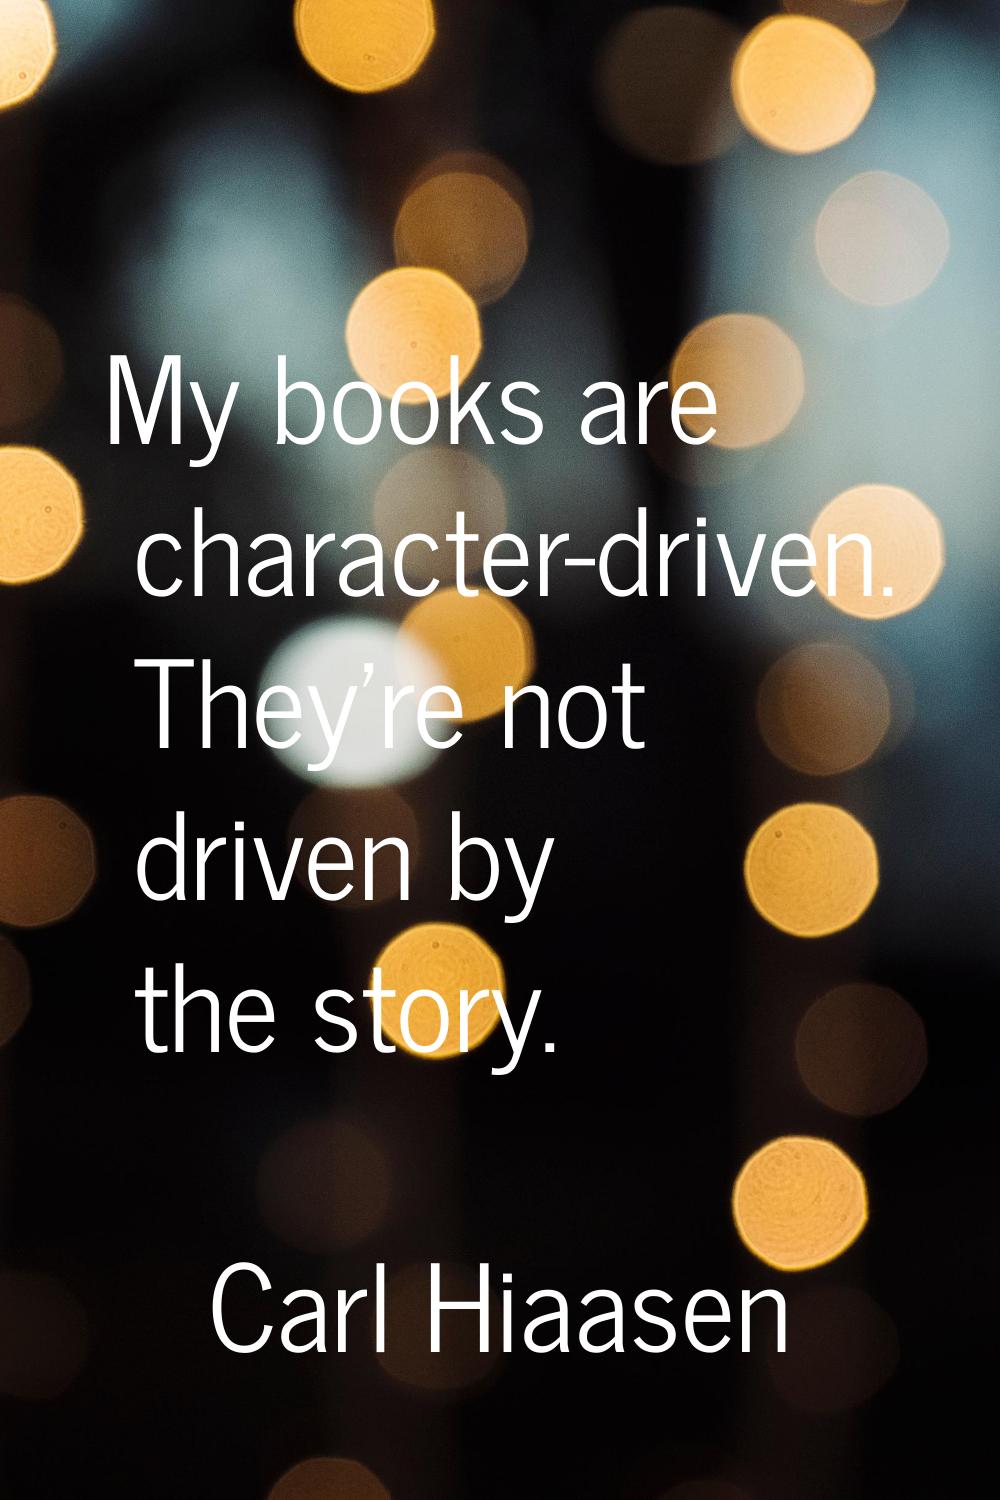 My books are character-driven. They're not driven by the story.